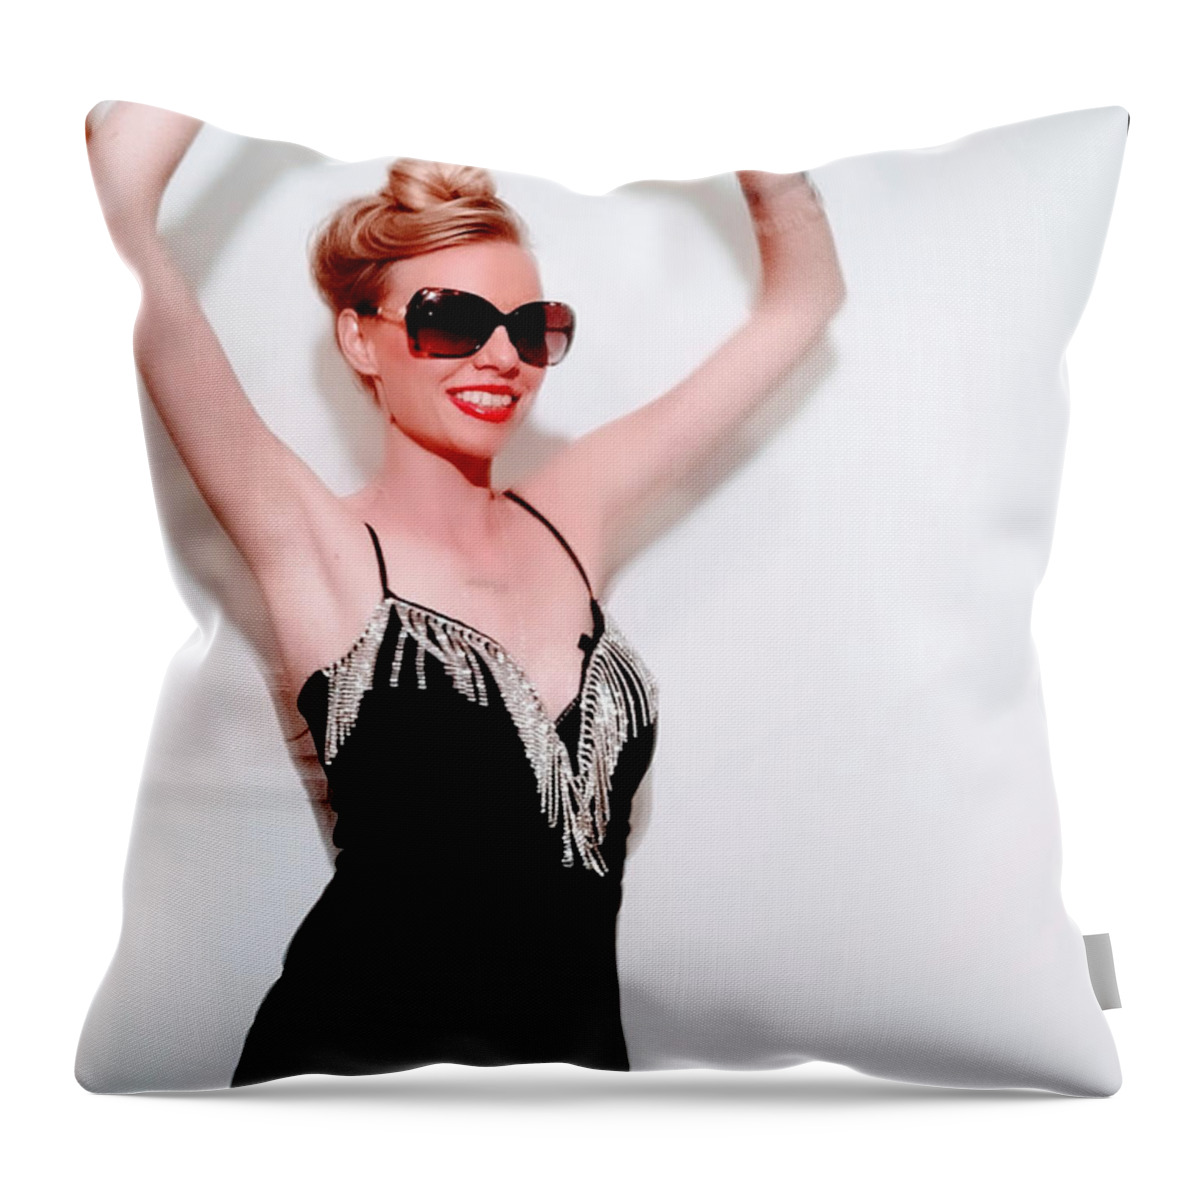 Fashion Throw Pillow featuring the photograph Smile Service by Yvonne Padmos